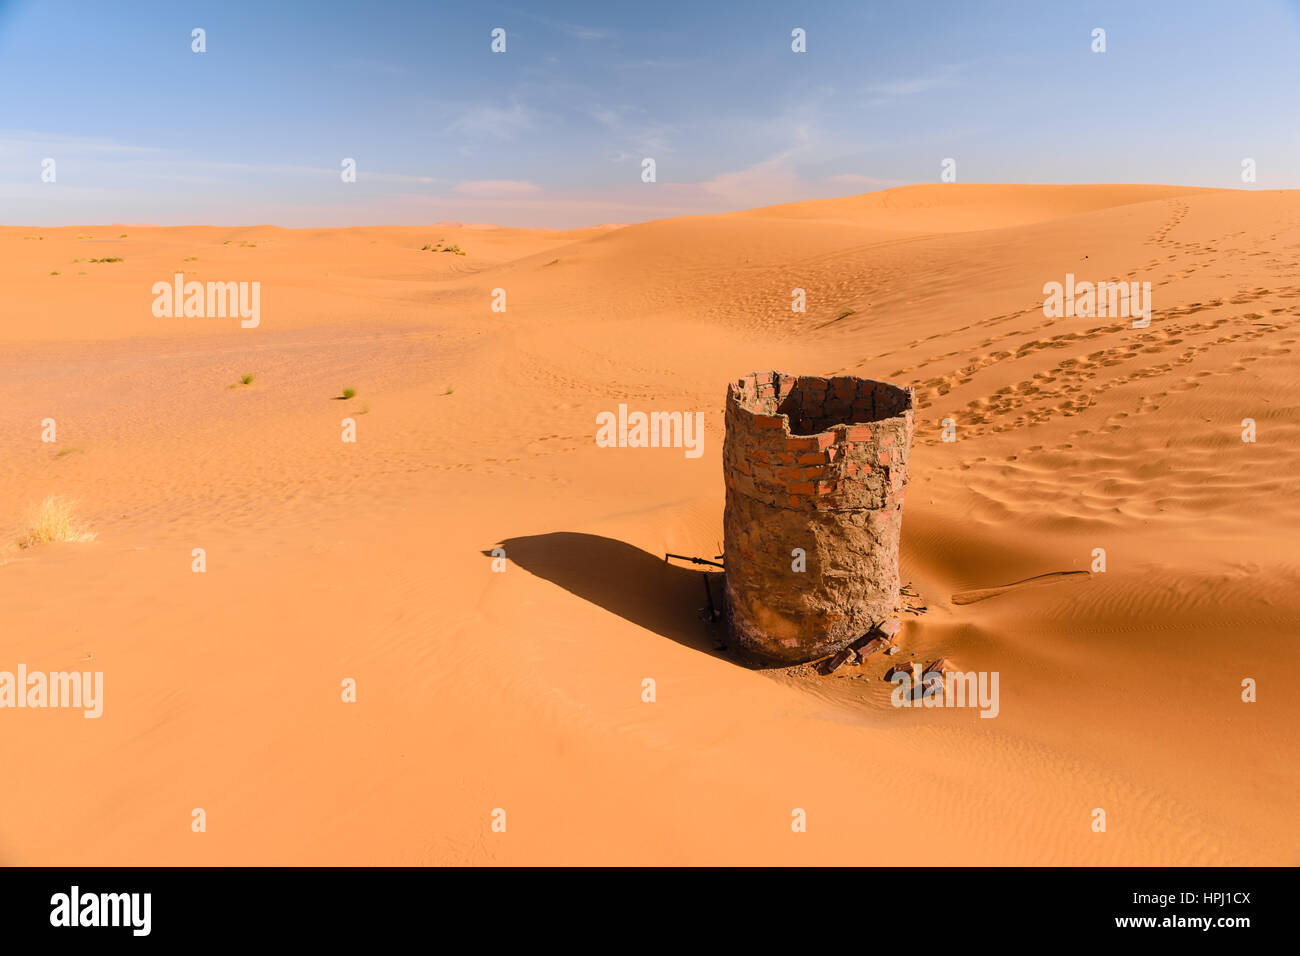 View over the dunes of Erg Chebbi desert near Merzouga in Morocco with a dry water well in the foreground. Stock Photo